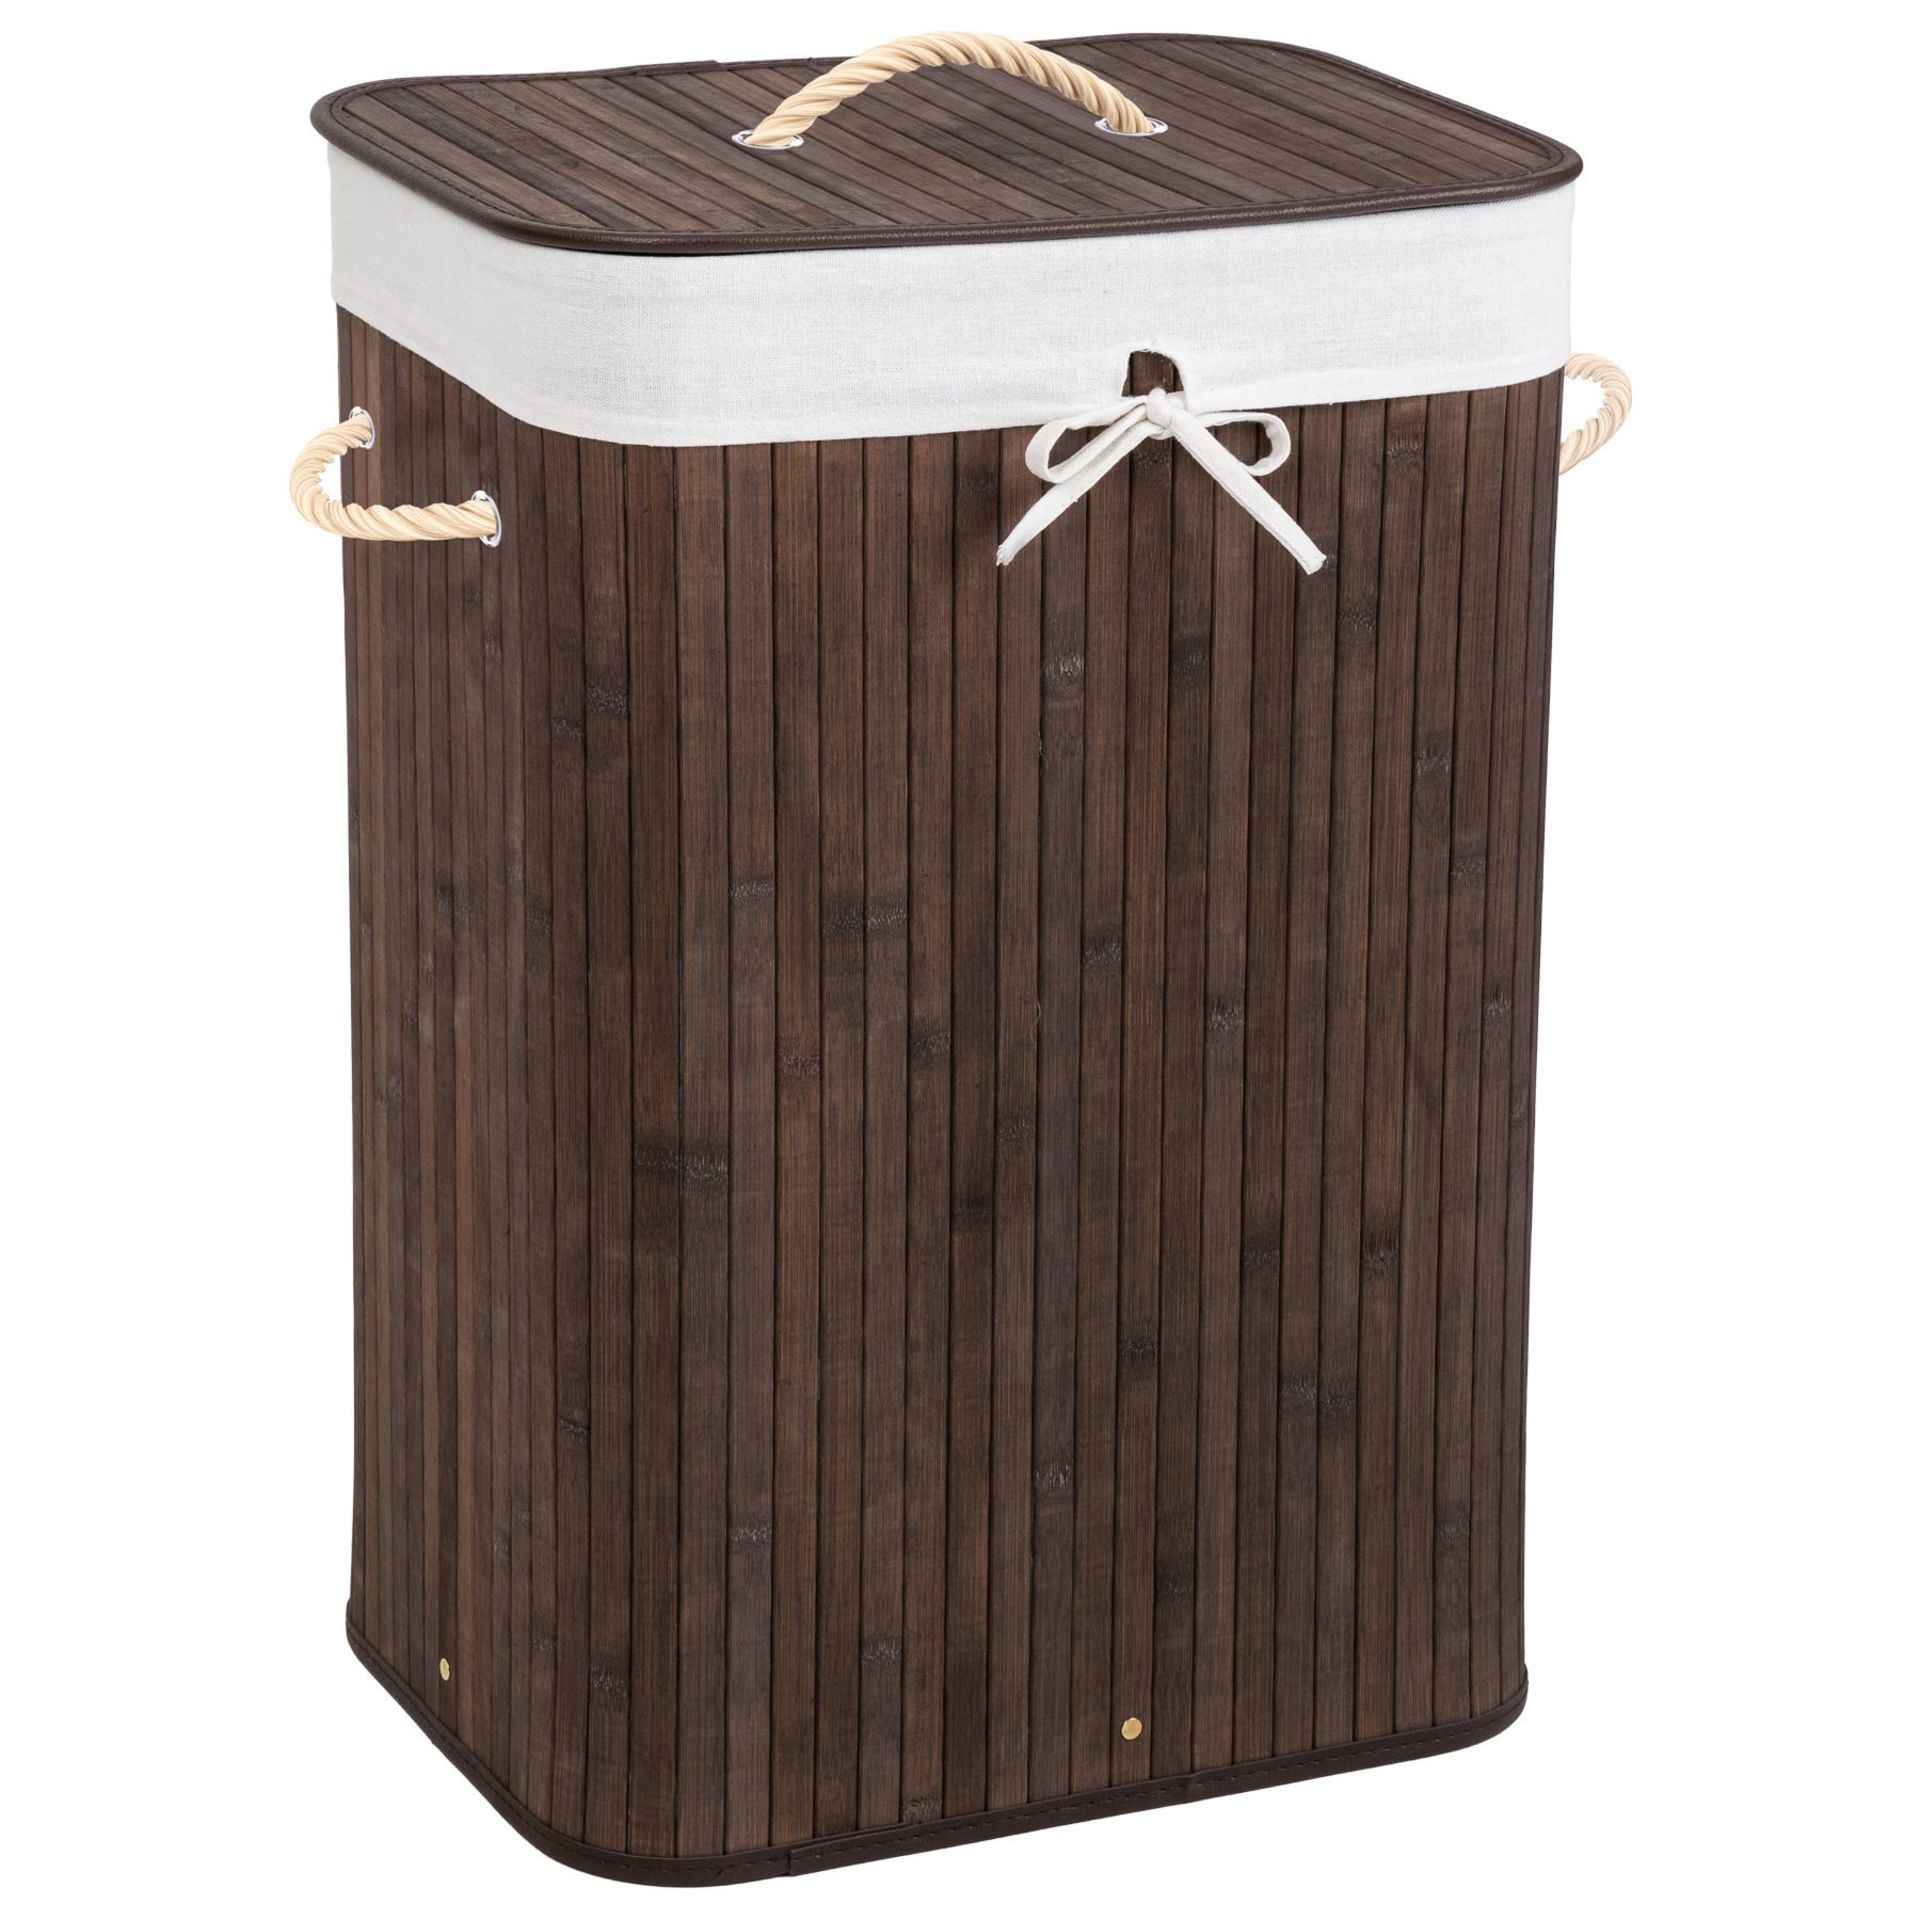 Tectake - Laundry Basket With Laundry Bag - Boxed. RRP £44.00 - Image 2 of 2